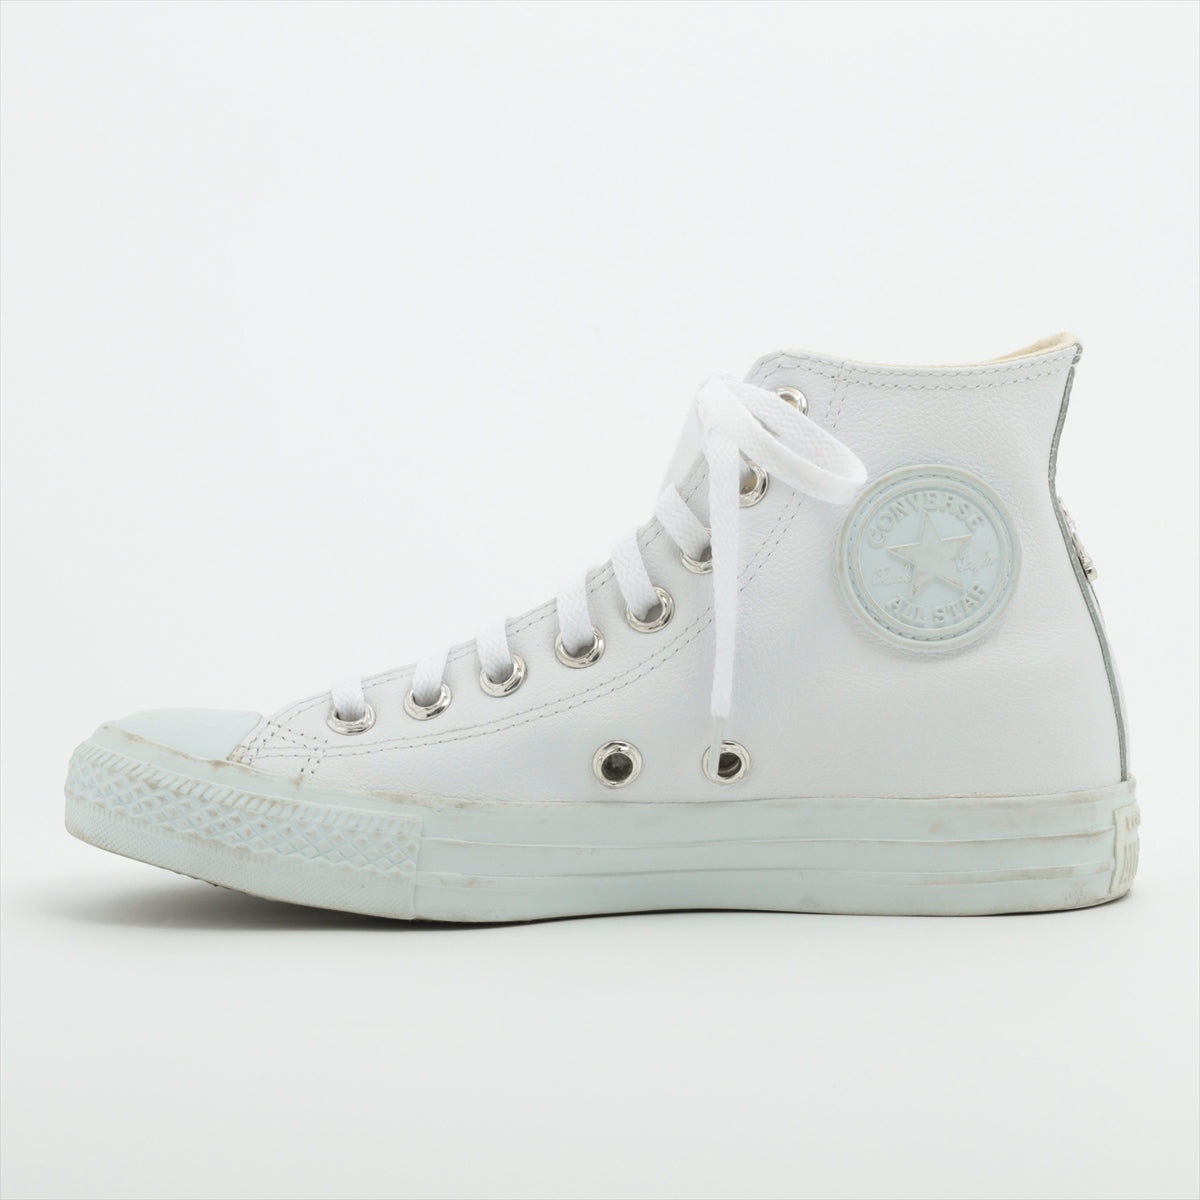 Chrome Hearts x Converse Matty Boy High-top Sneakers Leather size 6 1/2 White